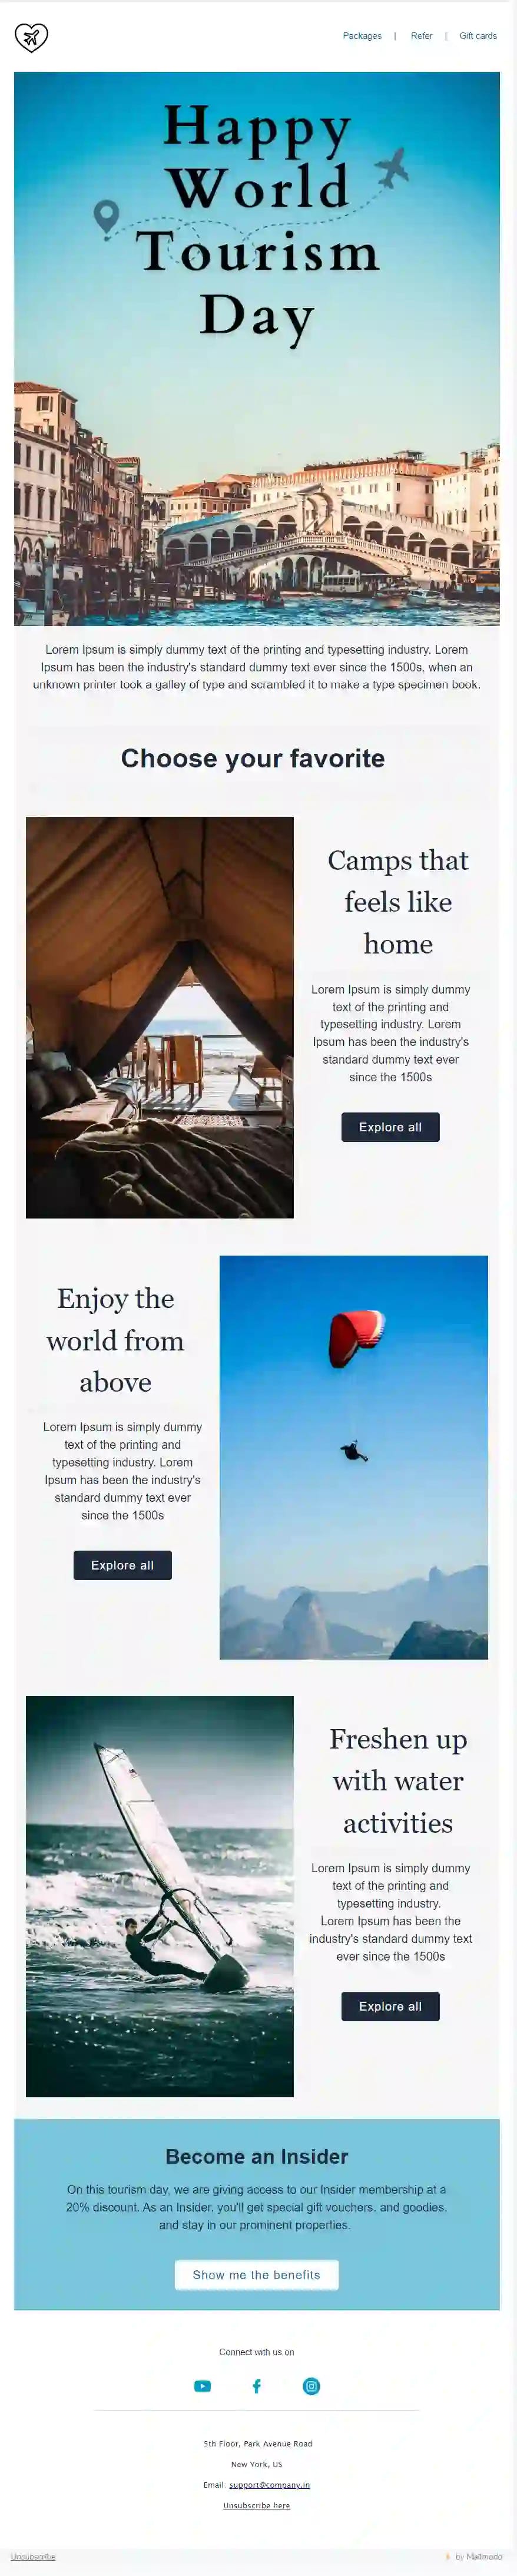 Free World Tourism Day Email Template